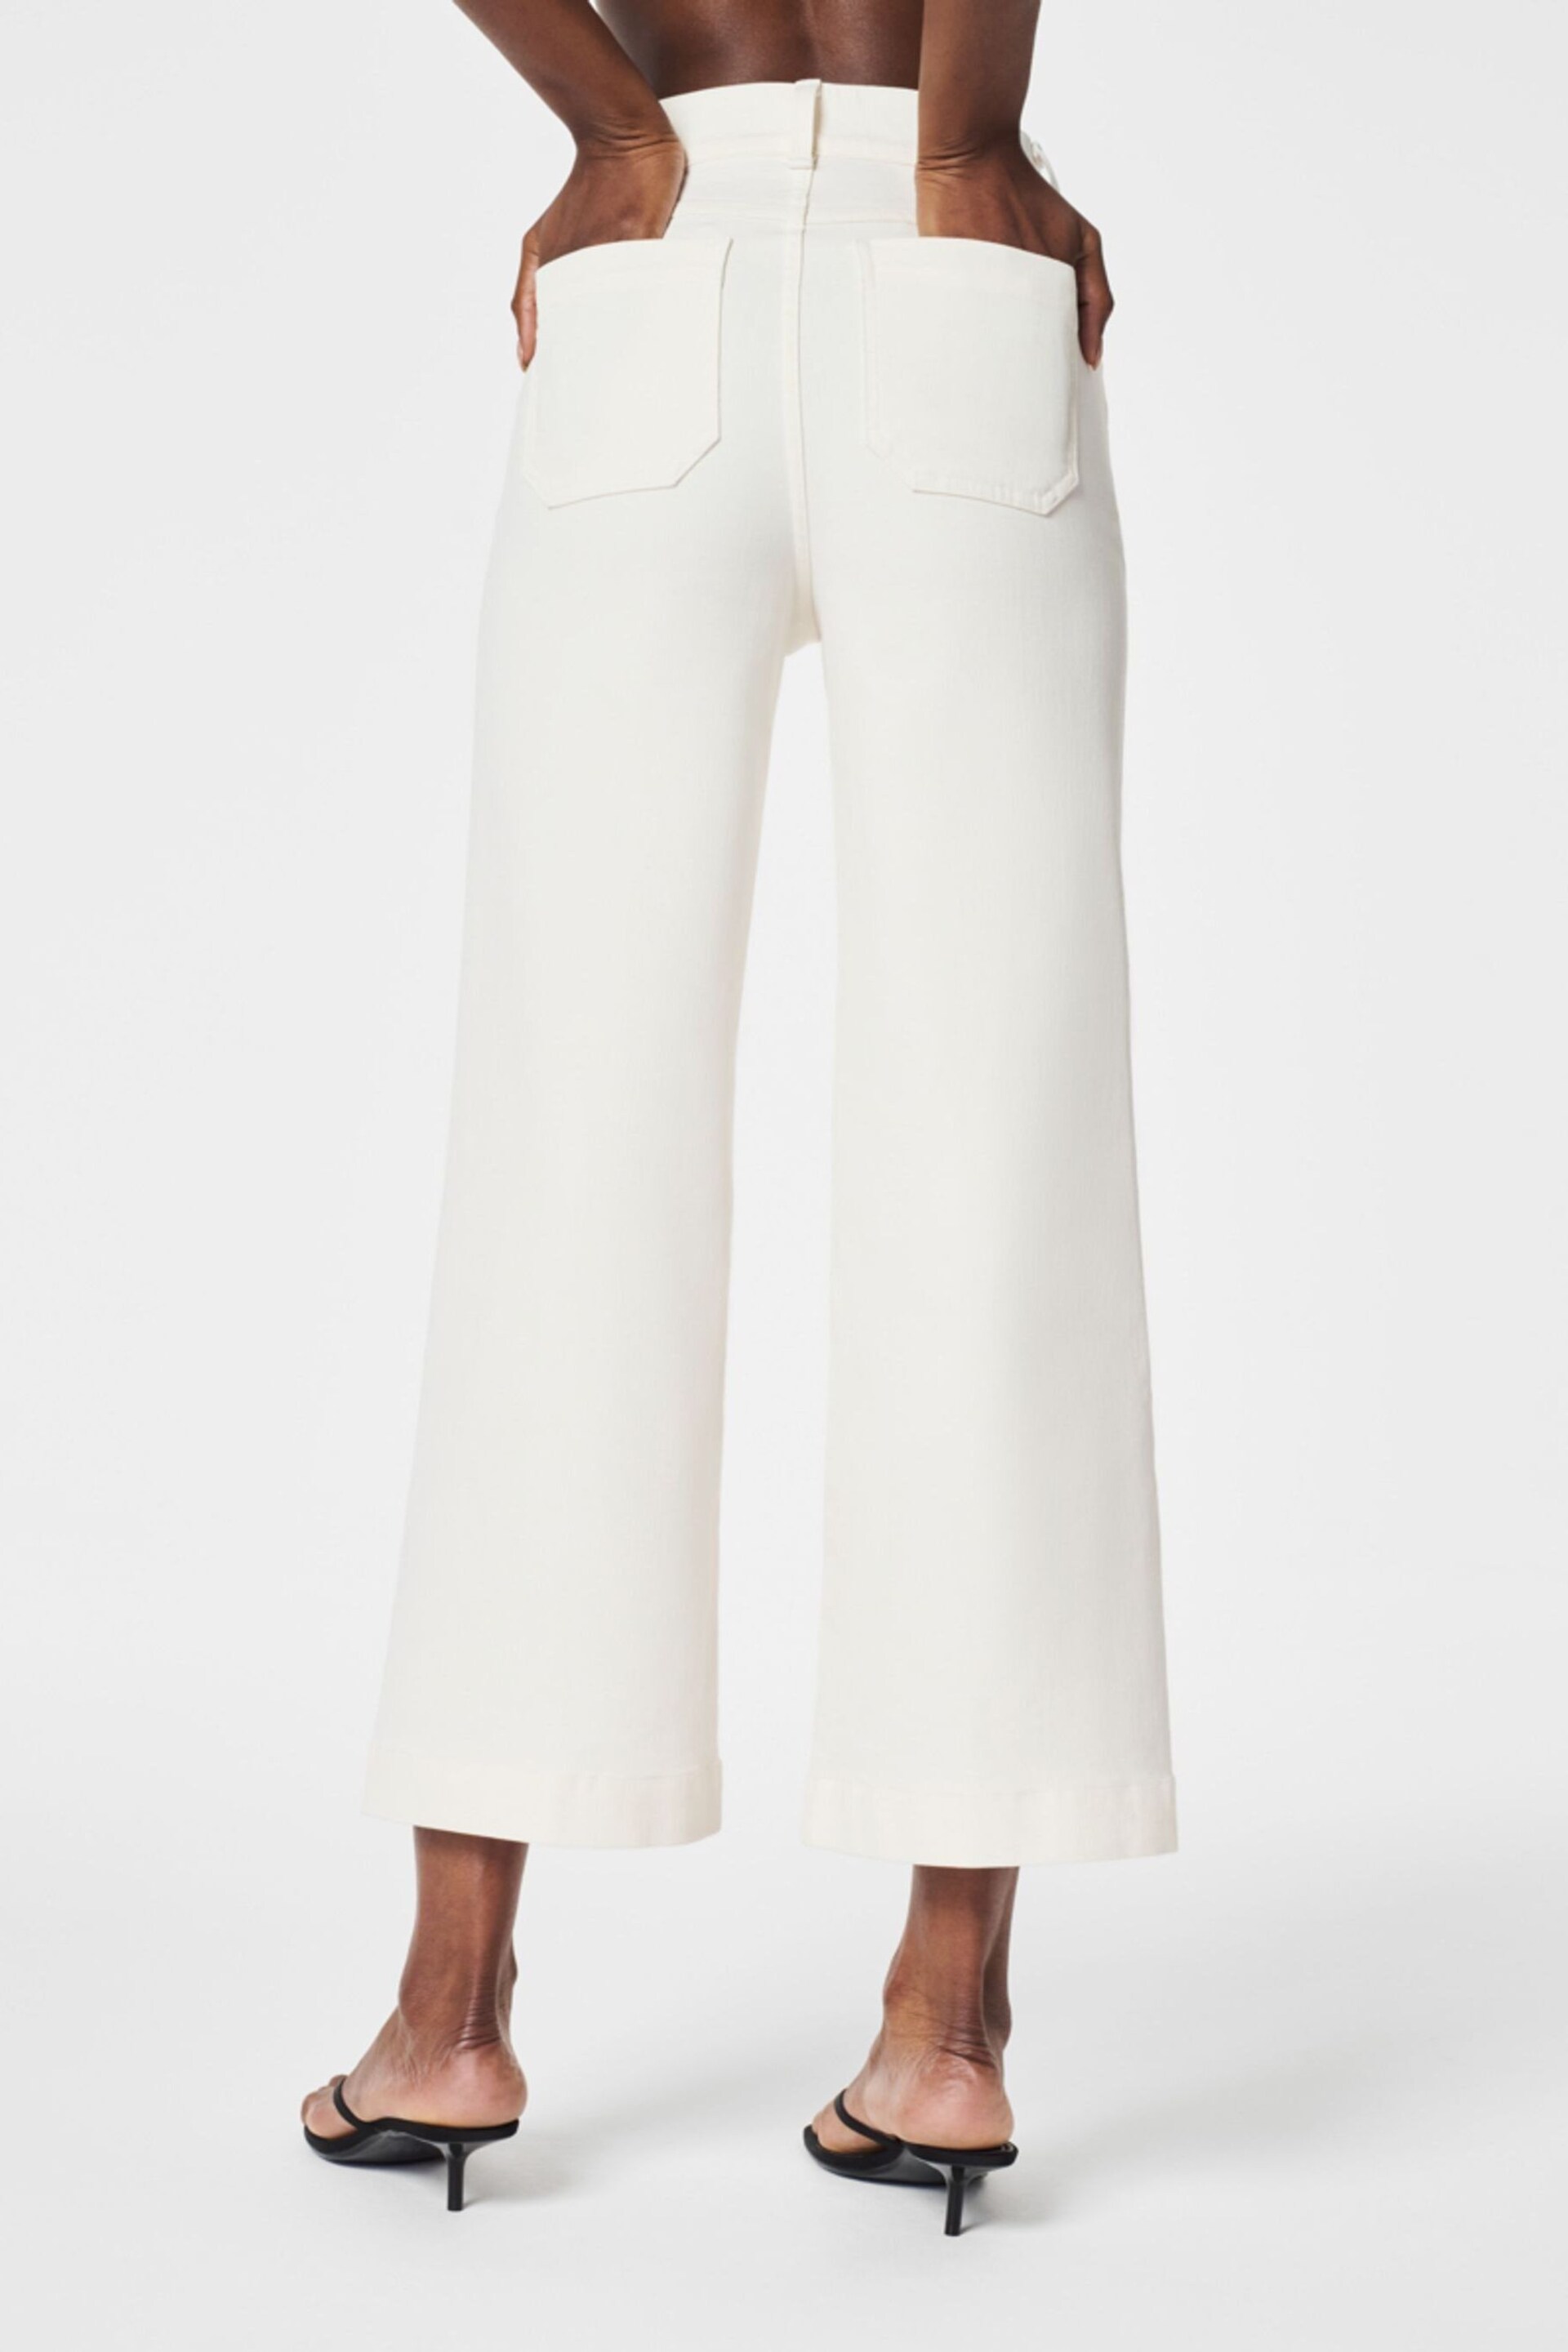 SPANX Cropped Raw Hem Wide Leg White Jeans - Image 2 of 5